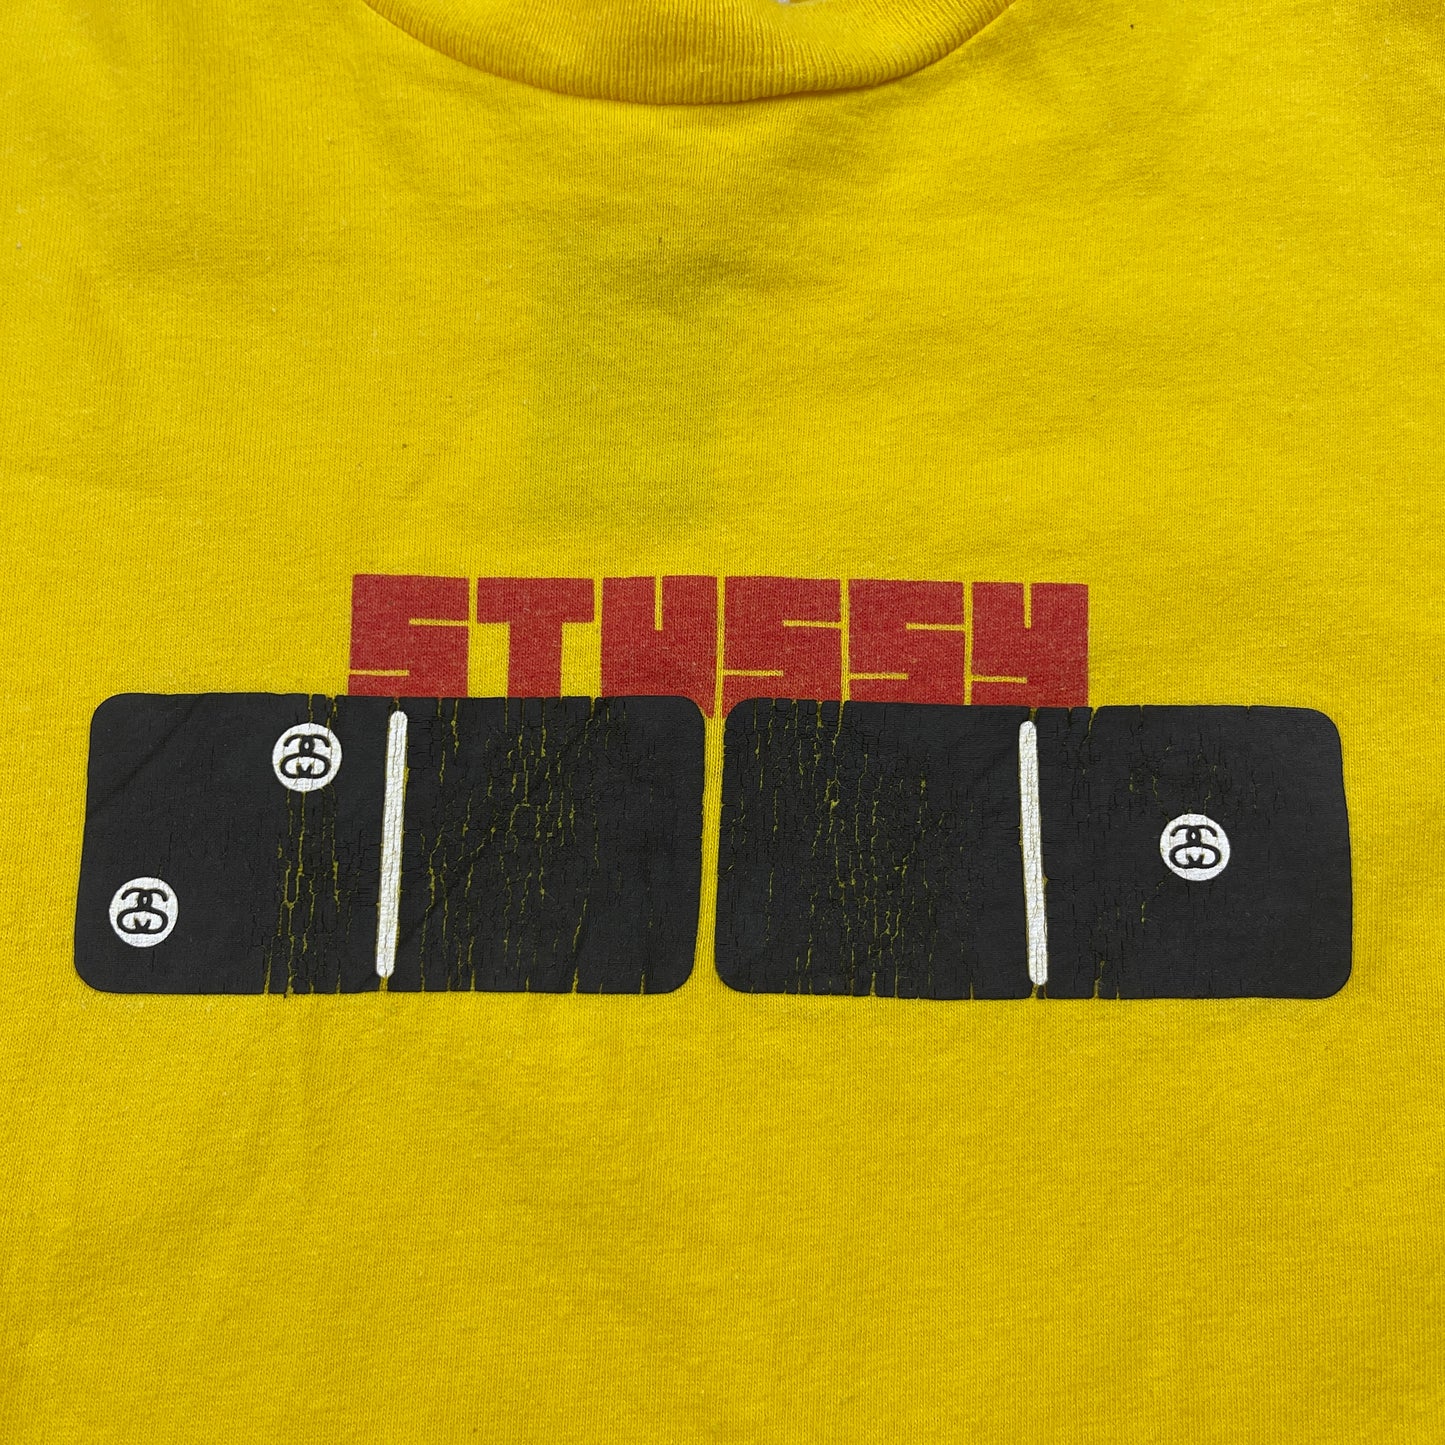 Vintage Stussy 90's "Dice" made in USA T-shirt